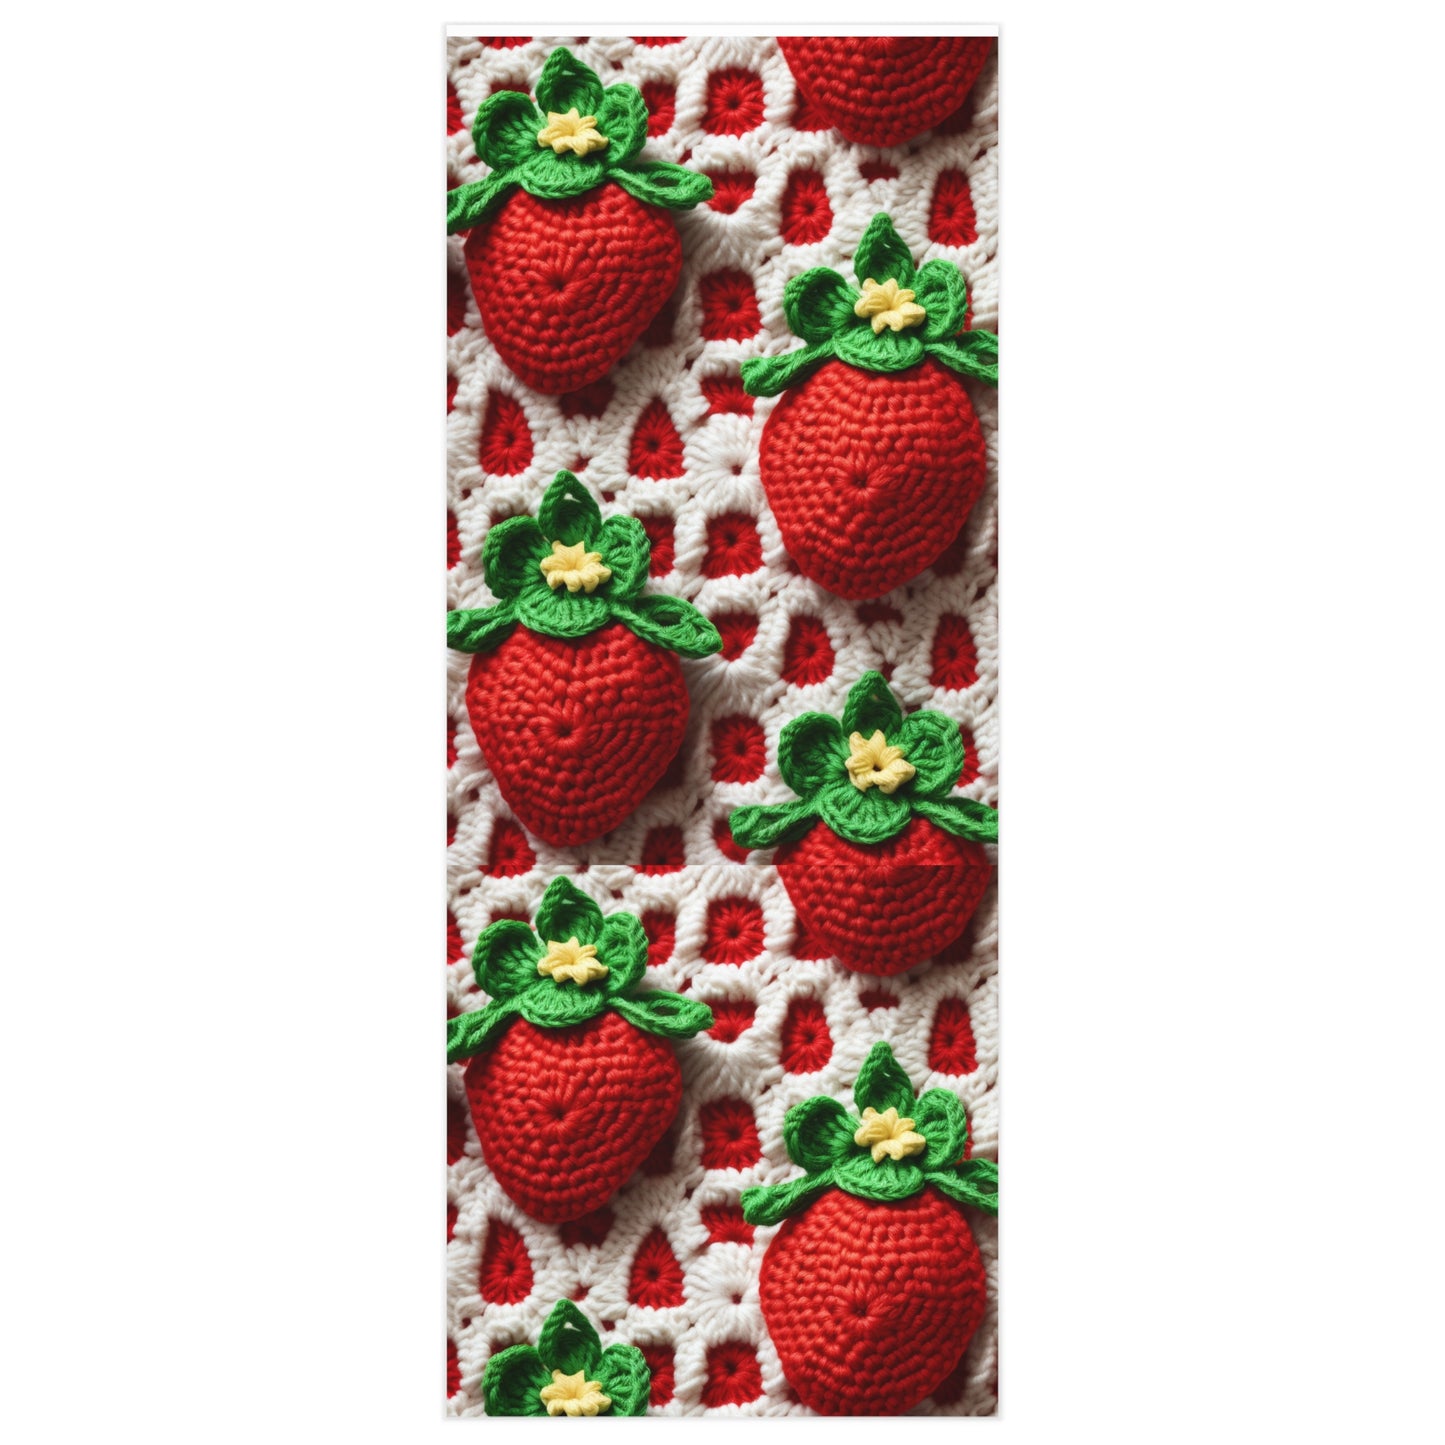 Strawberry Crochet Pattern - Amigurumi Strawberries - Fruit Design for Home and Gifts - Wrapping Paper